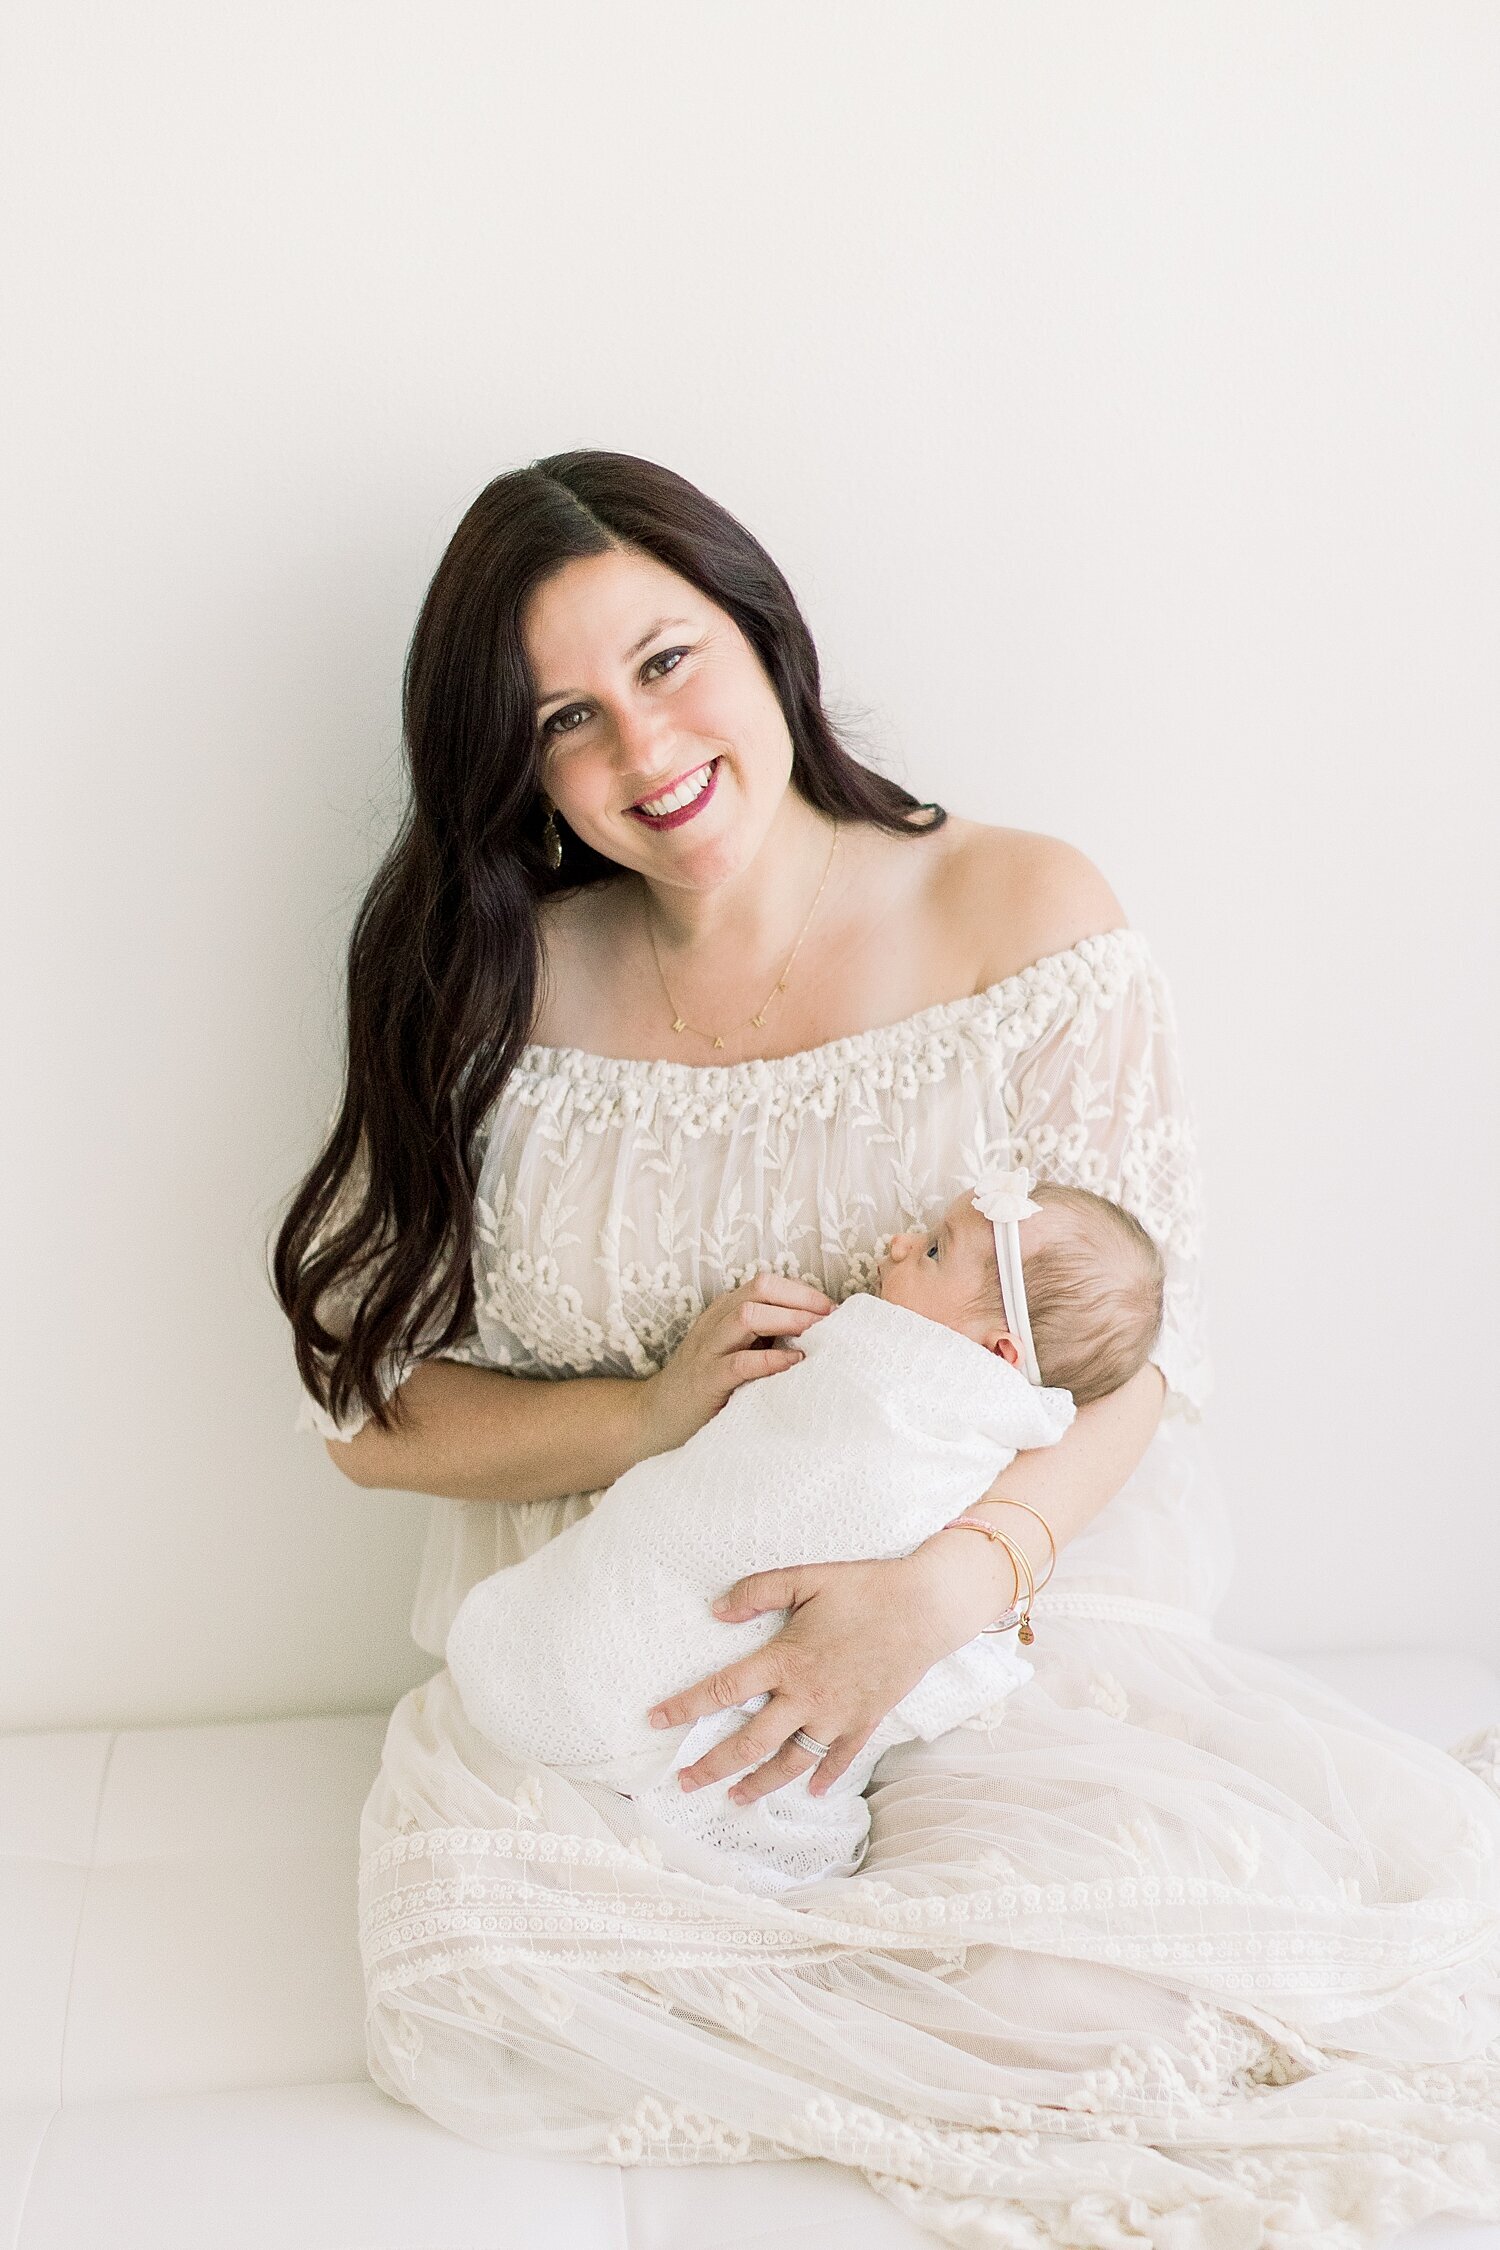 Mom holding her baby girl in studio in Newport Beach for newborn photoshoot with Ambre Williams Photography.